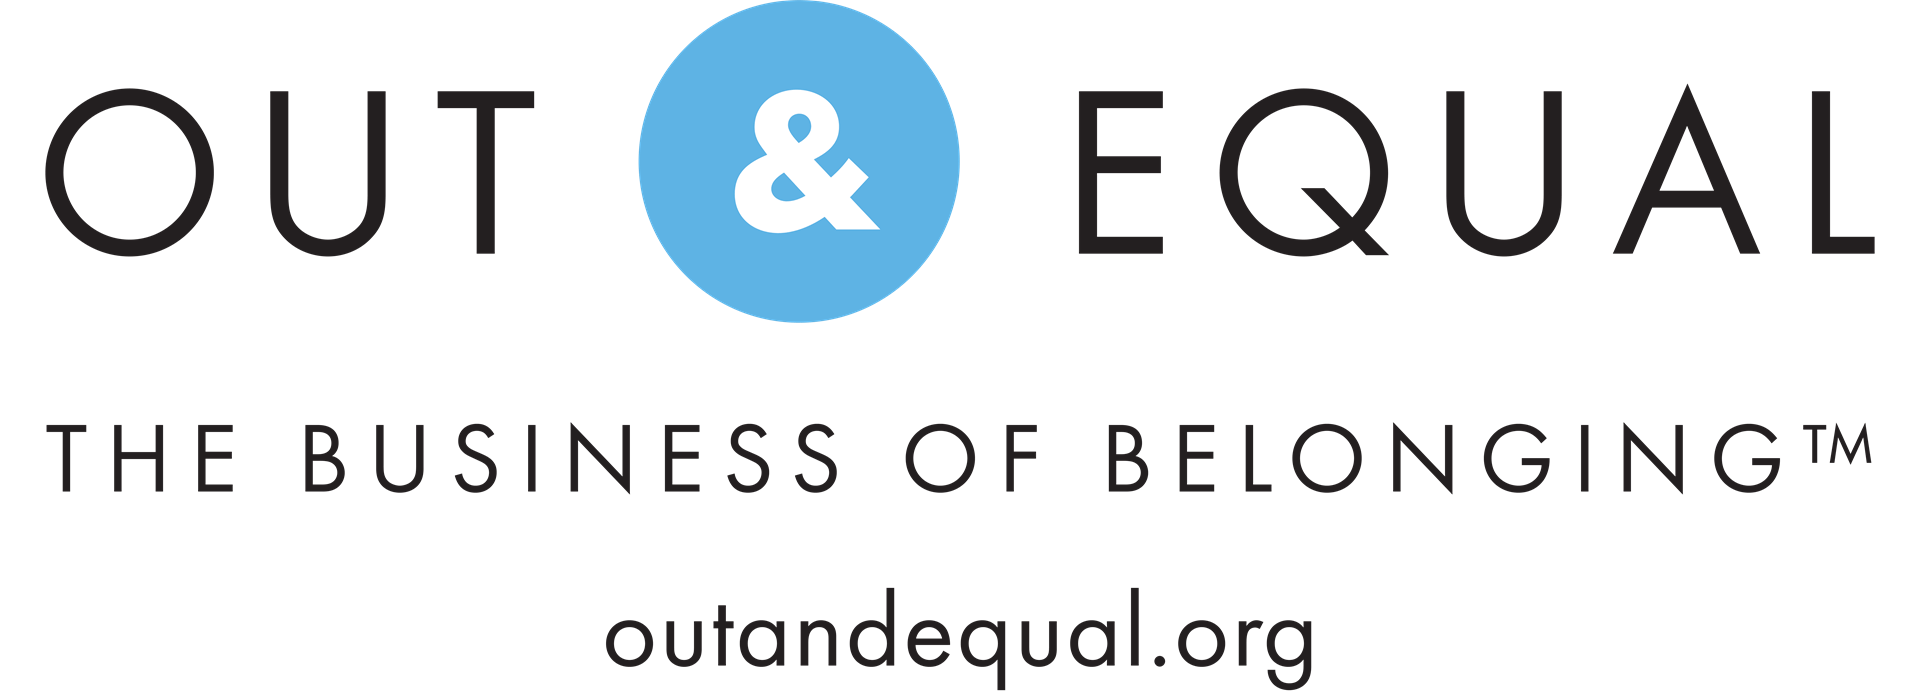 Out & Equal logo